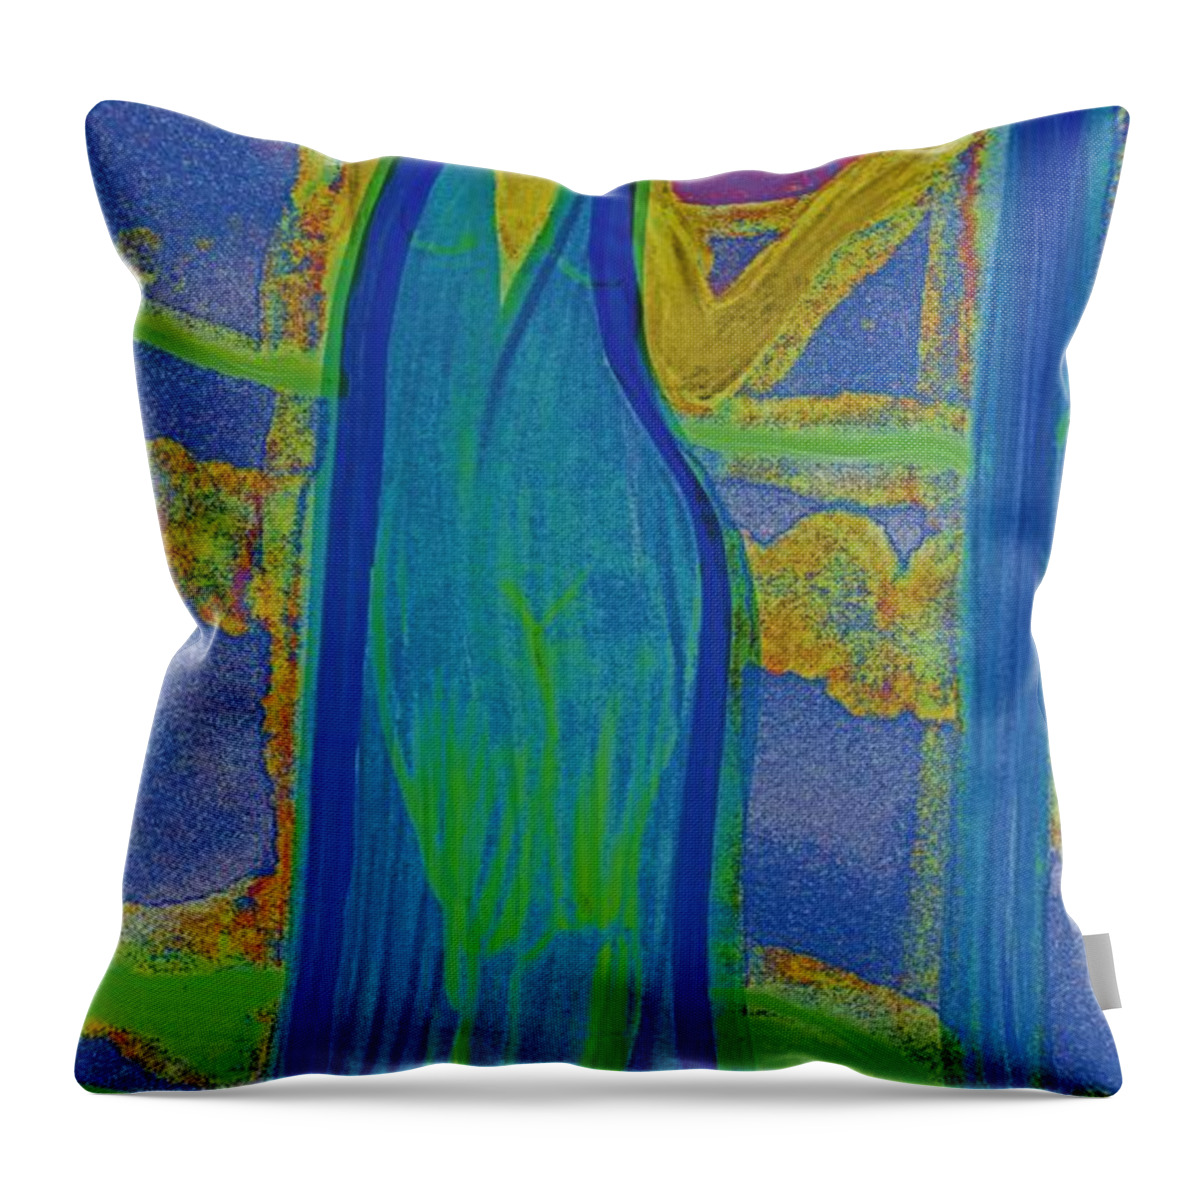 First Star Art Throw Pillow featuring the painting Aquarius by jrr by First Star Art